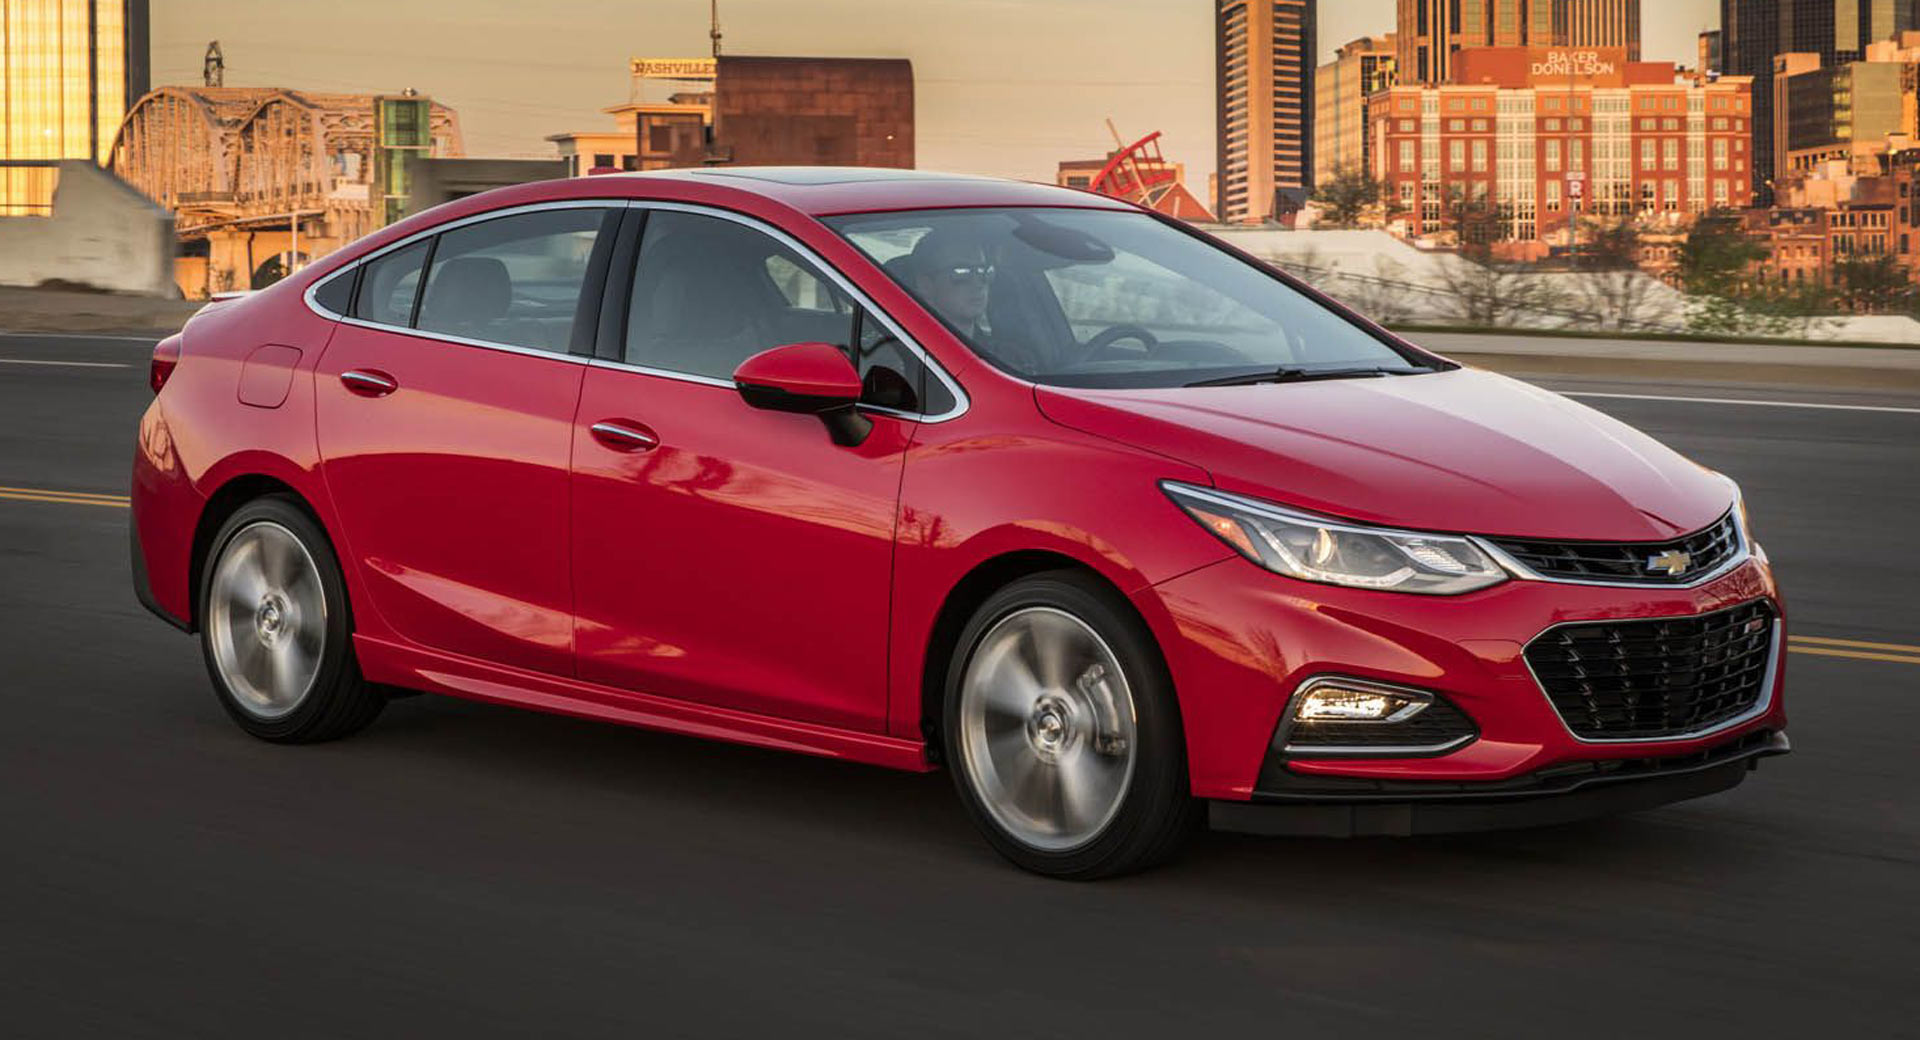 Chevrolet Offers Up To $3,000 Off The 2019 Cruze To Get Rid Of Stock